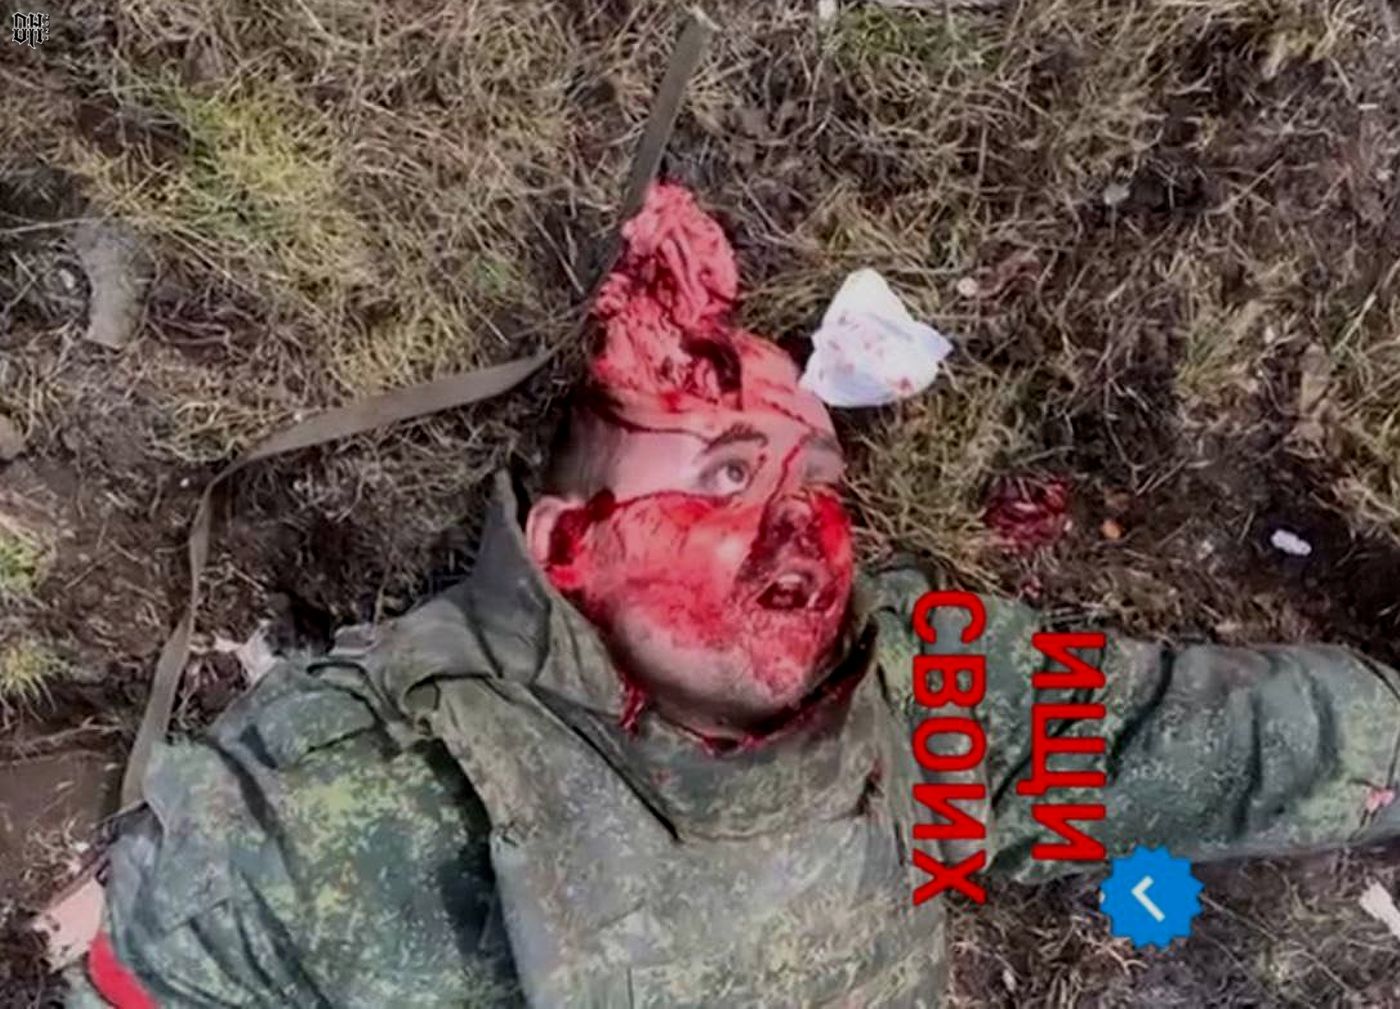 DH - Sldiers' Horror Faces and Bodies of Russia-Ukraine Conflict 38.jpg